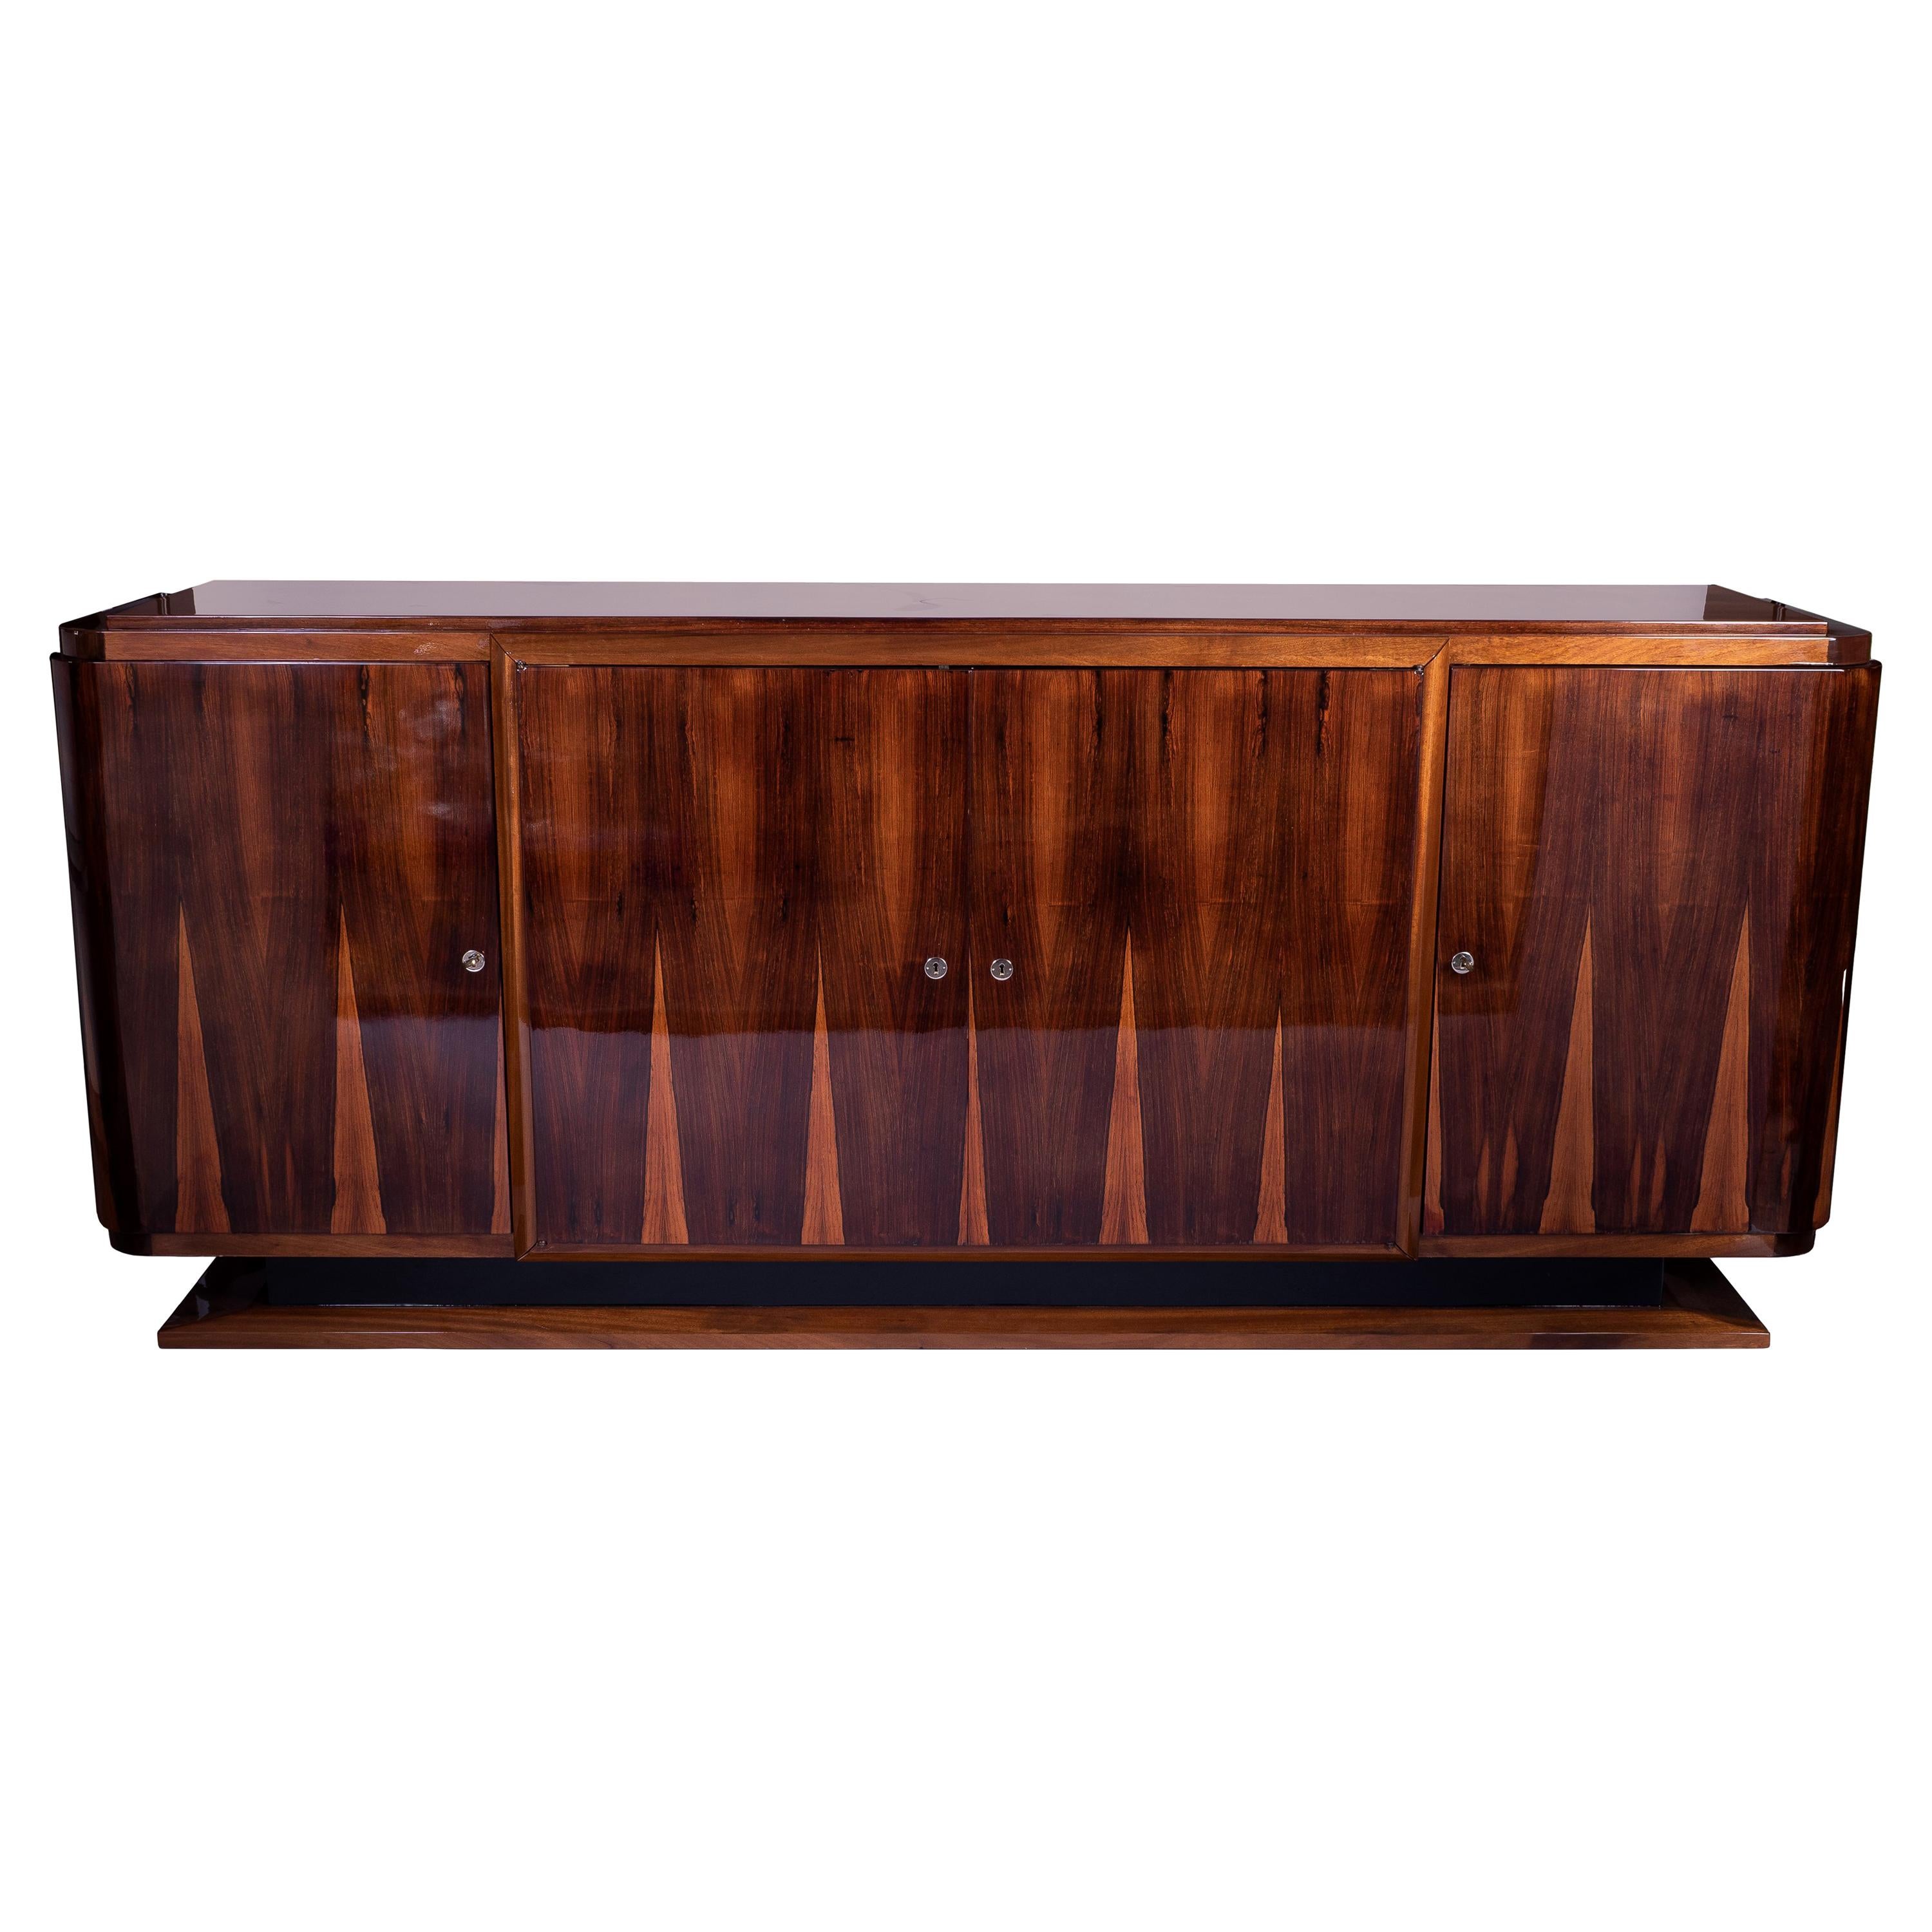 Grand French Art Deco Sideboard Credenza in Palisander